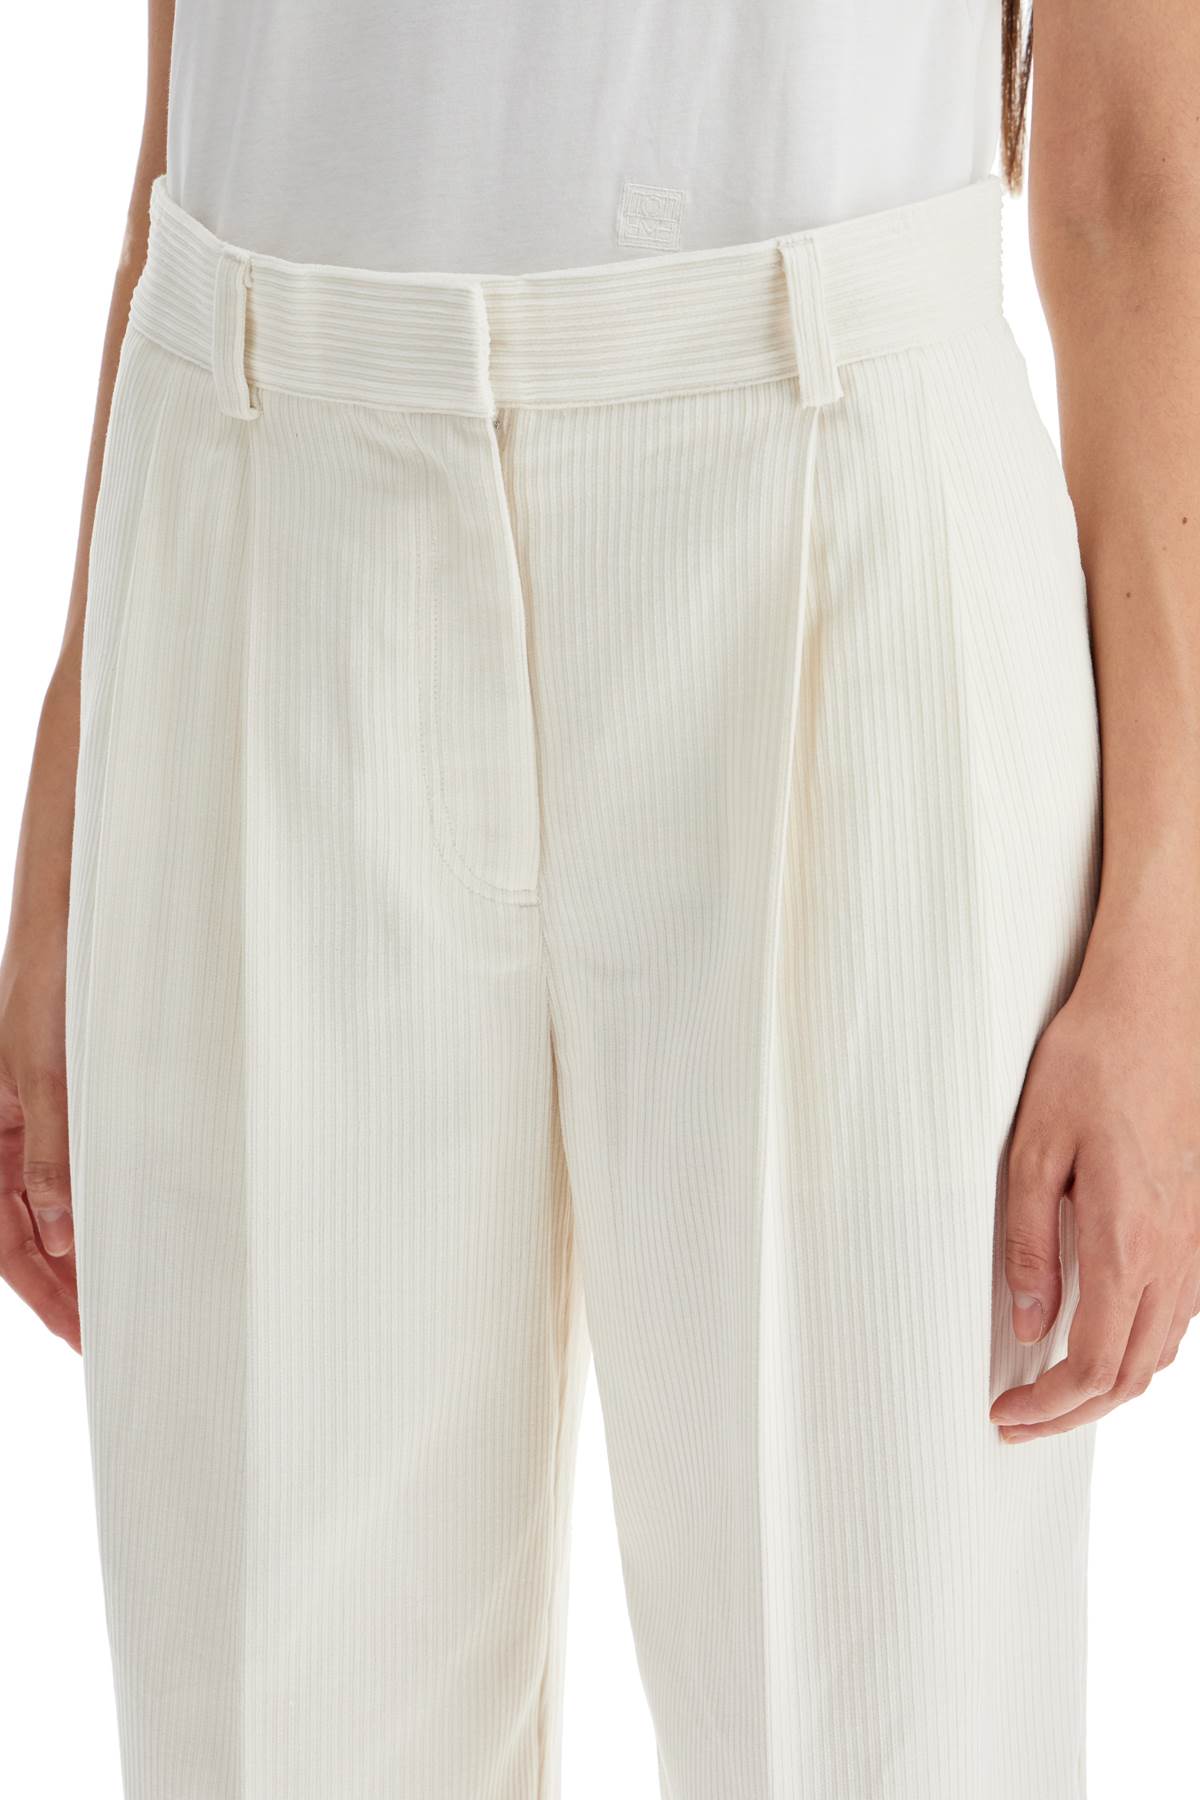 Shop Totême Silk And Cotton Corduroy Pants Made In White